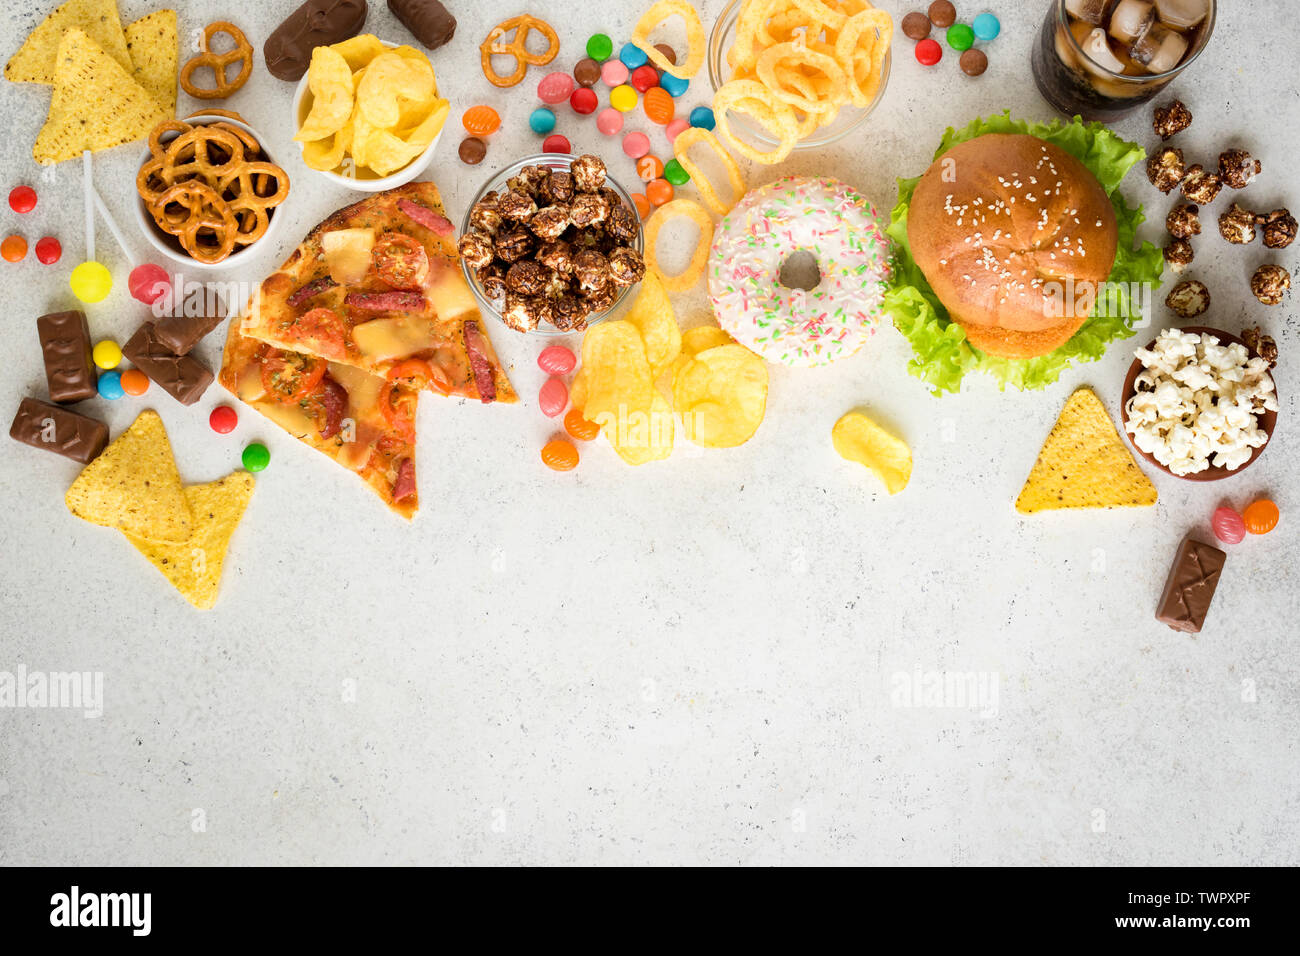 Assortment of Unhealthy Food, top view, copy space. Unhealthy eating, junk food concept. Stock Photo